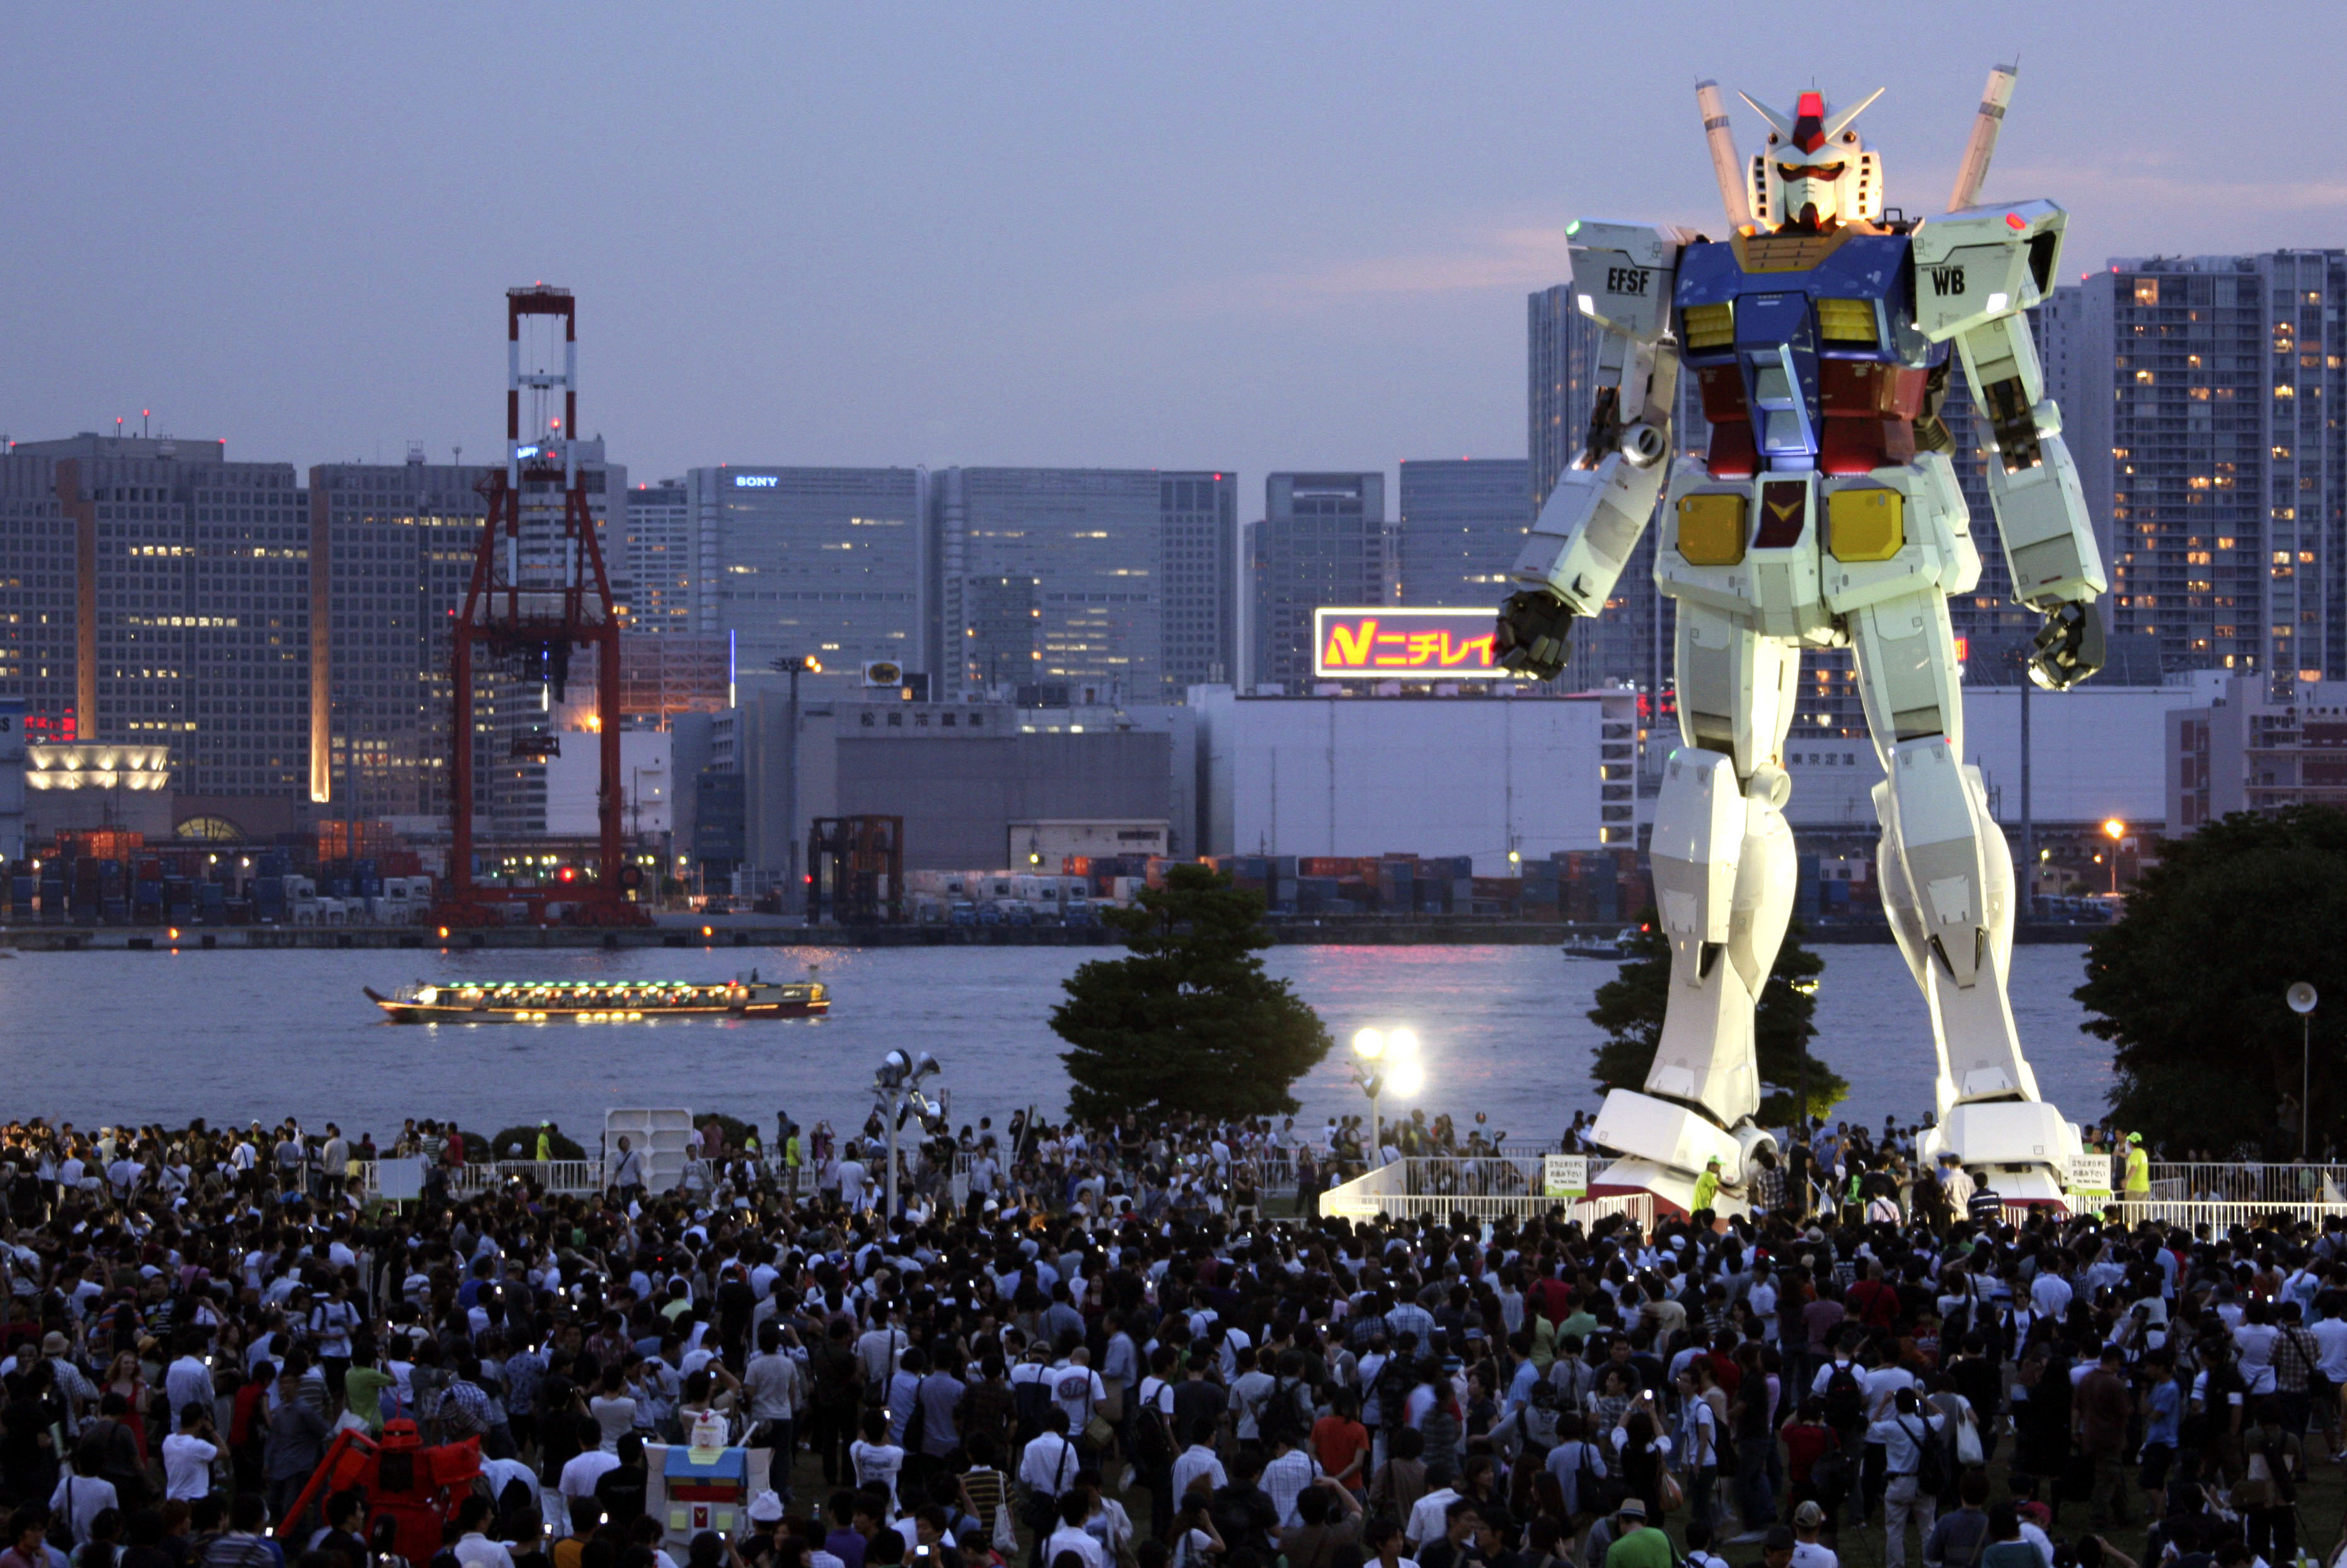 Giant robots officially the for cool Japan | The Japan Times